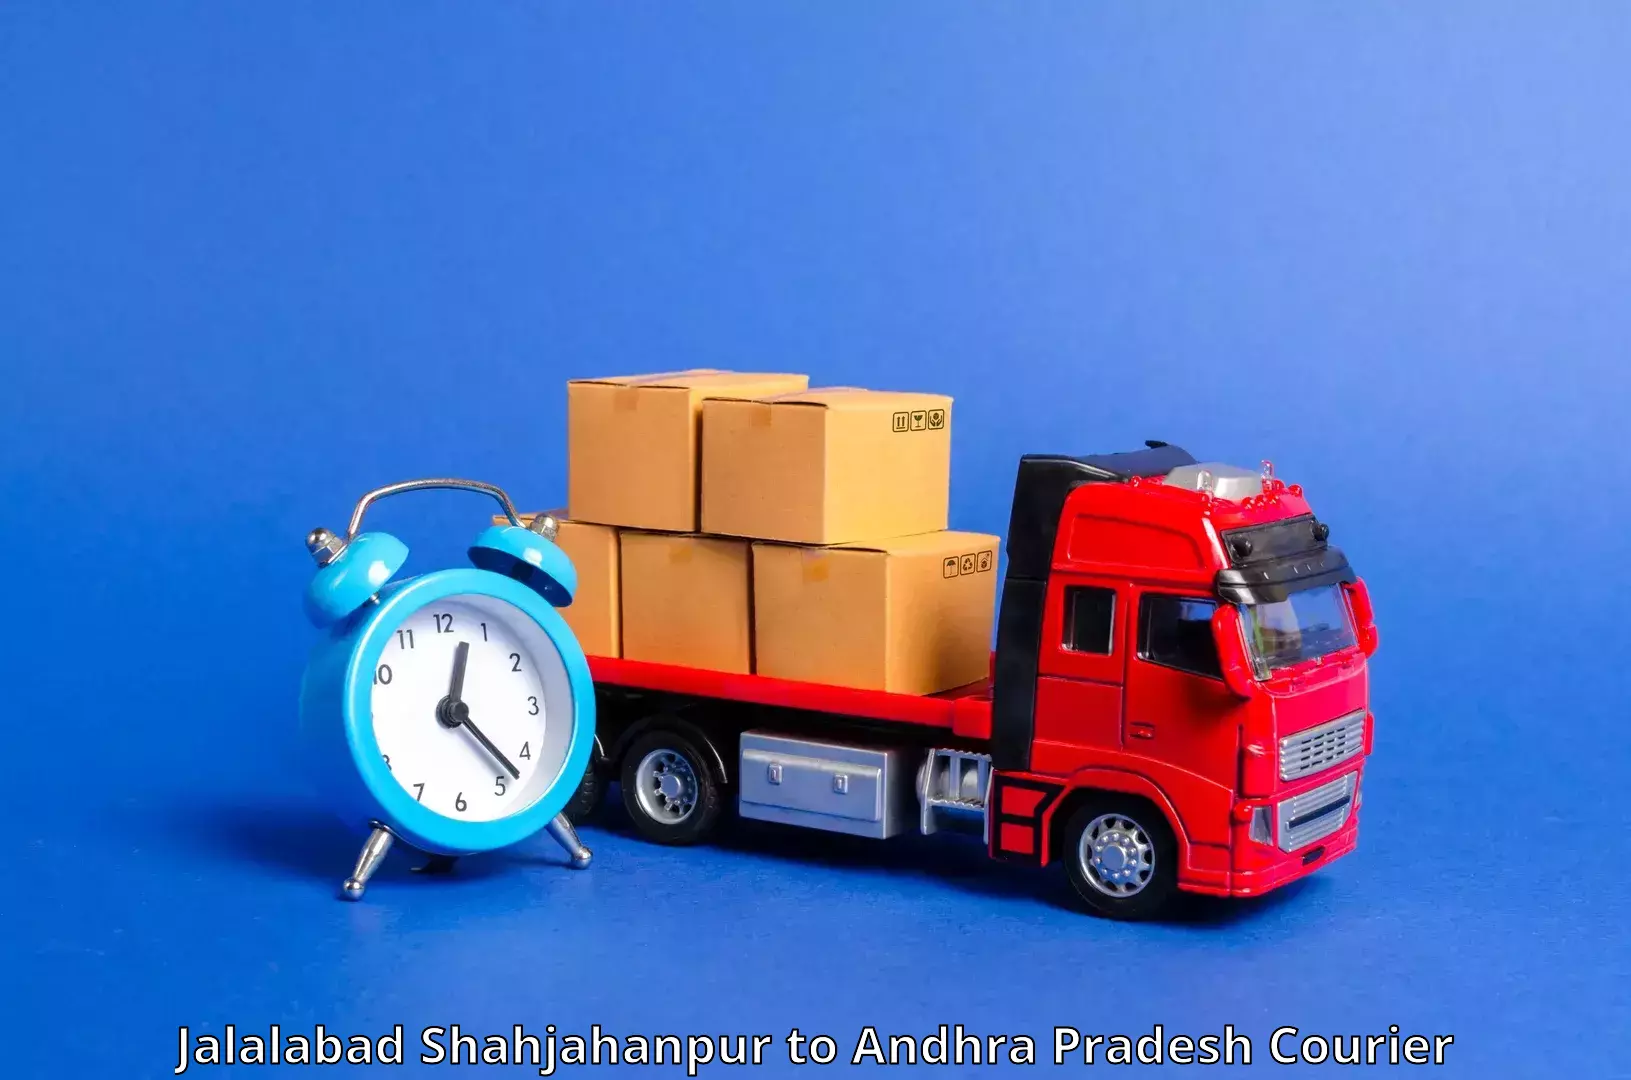 Courier service efficiency Jalalabad Shahjahanpur to Samalkot